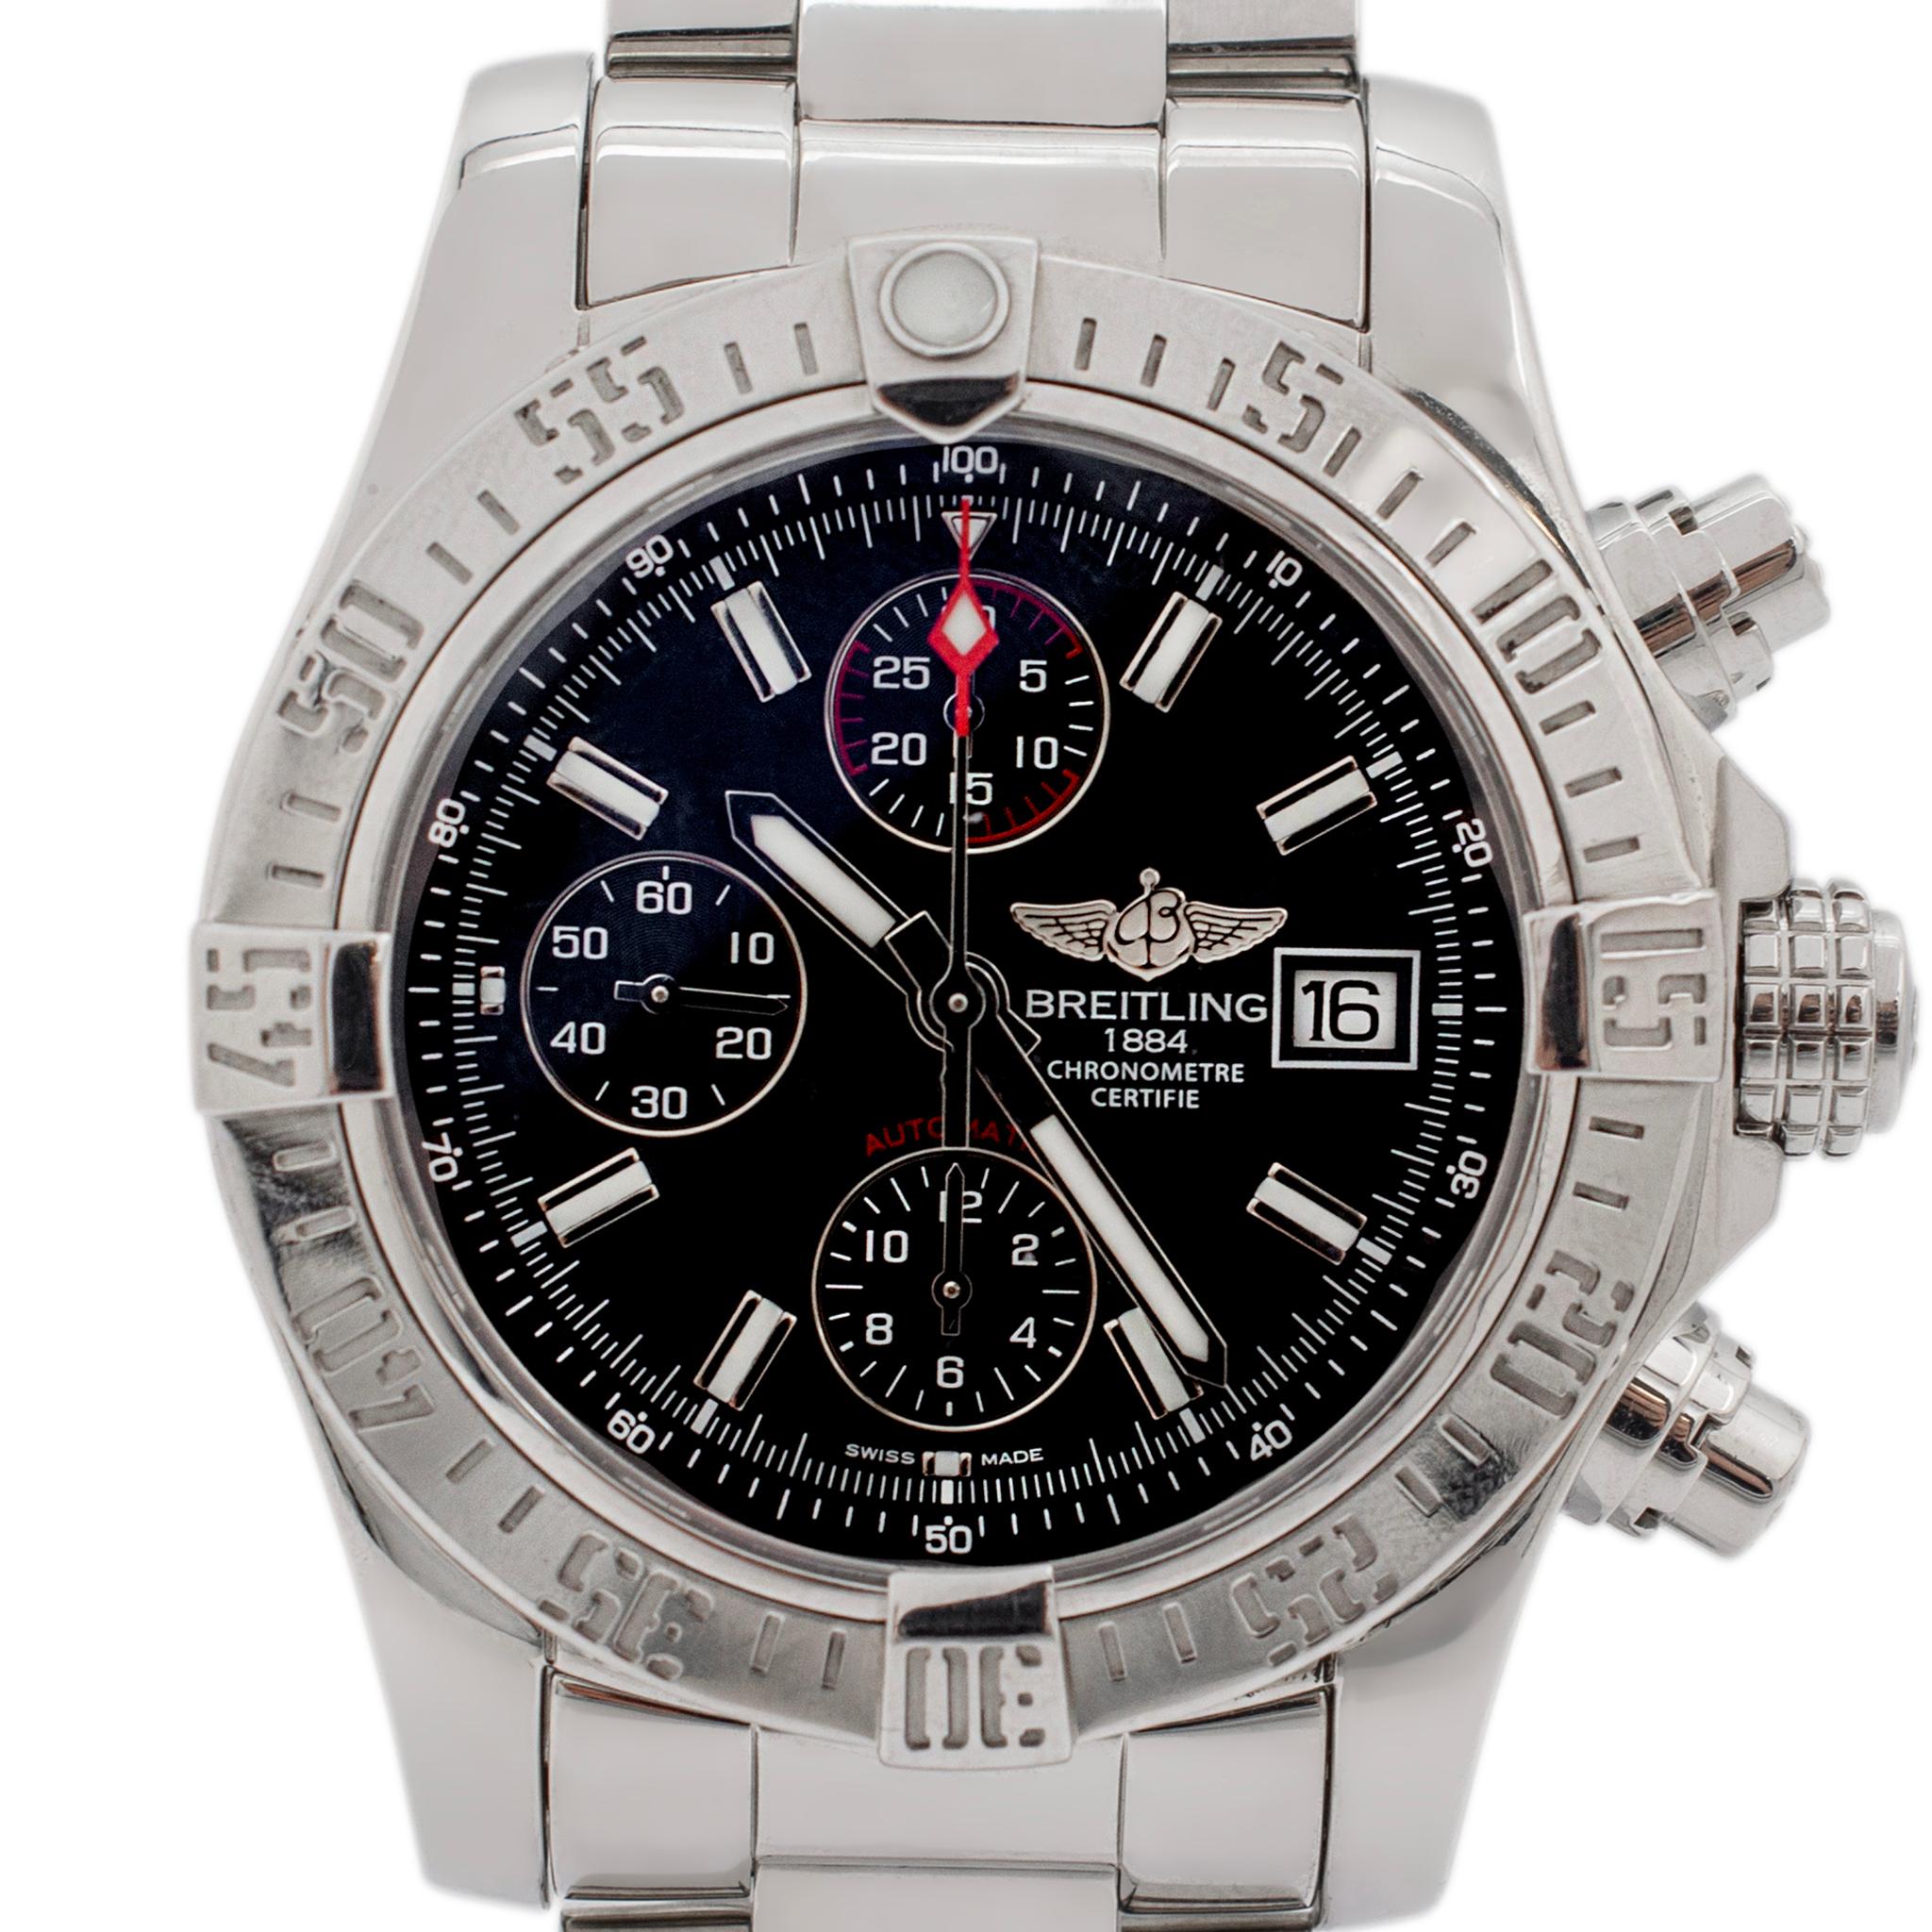 Brand: Breitling

Gender: Men

Metal Type: Stainless Steel

Diameter: 43.00 mm

Weight:  215.68 grams

BREITLING Swiss-made watch with original box and papers. The 